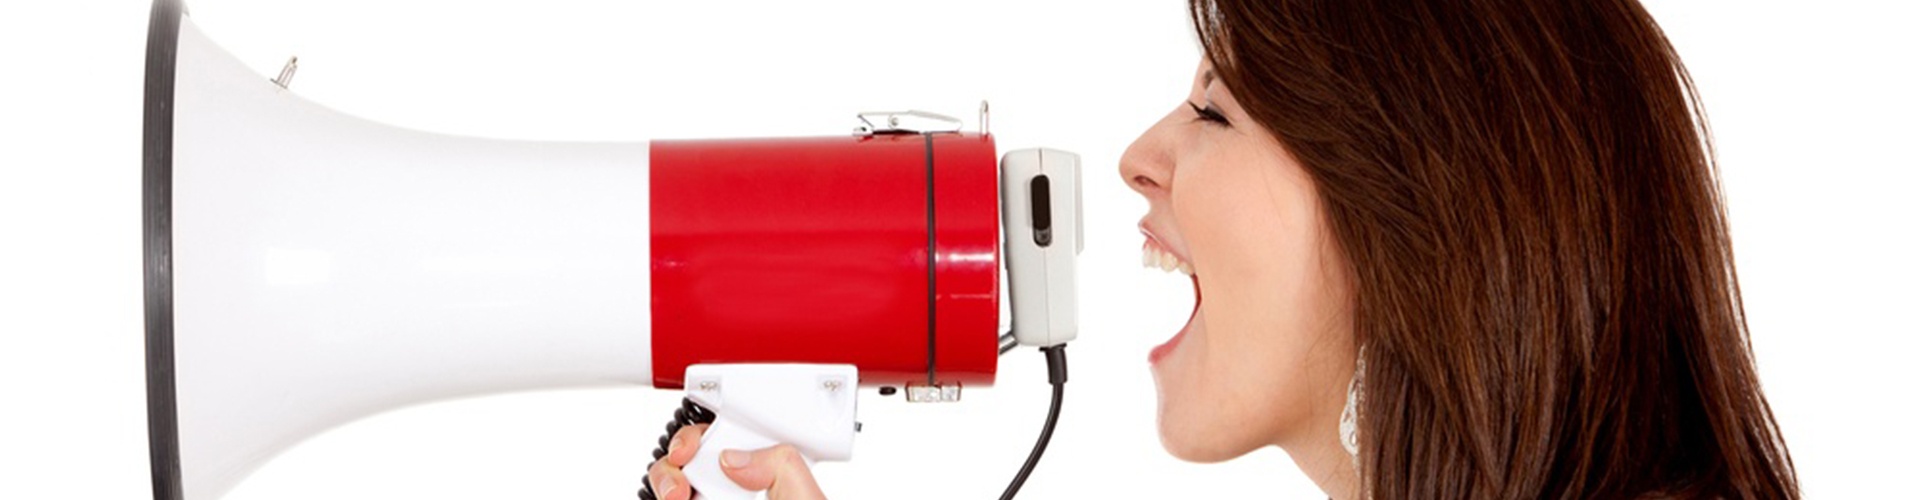 YOUR PROPERTY MANAGER AND YOU - WHEN NOISE IS A PROBLEM